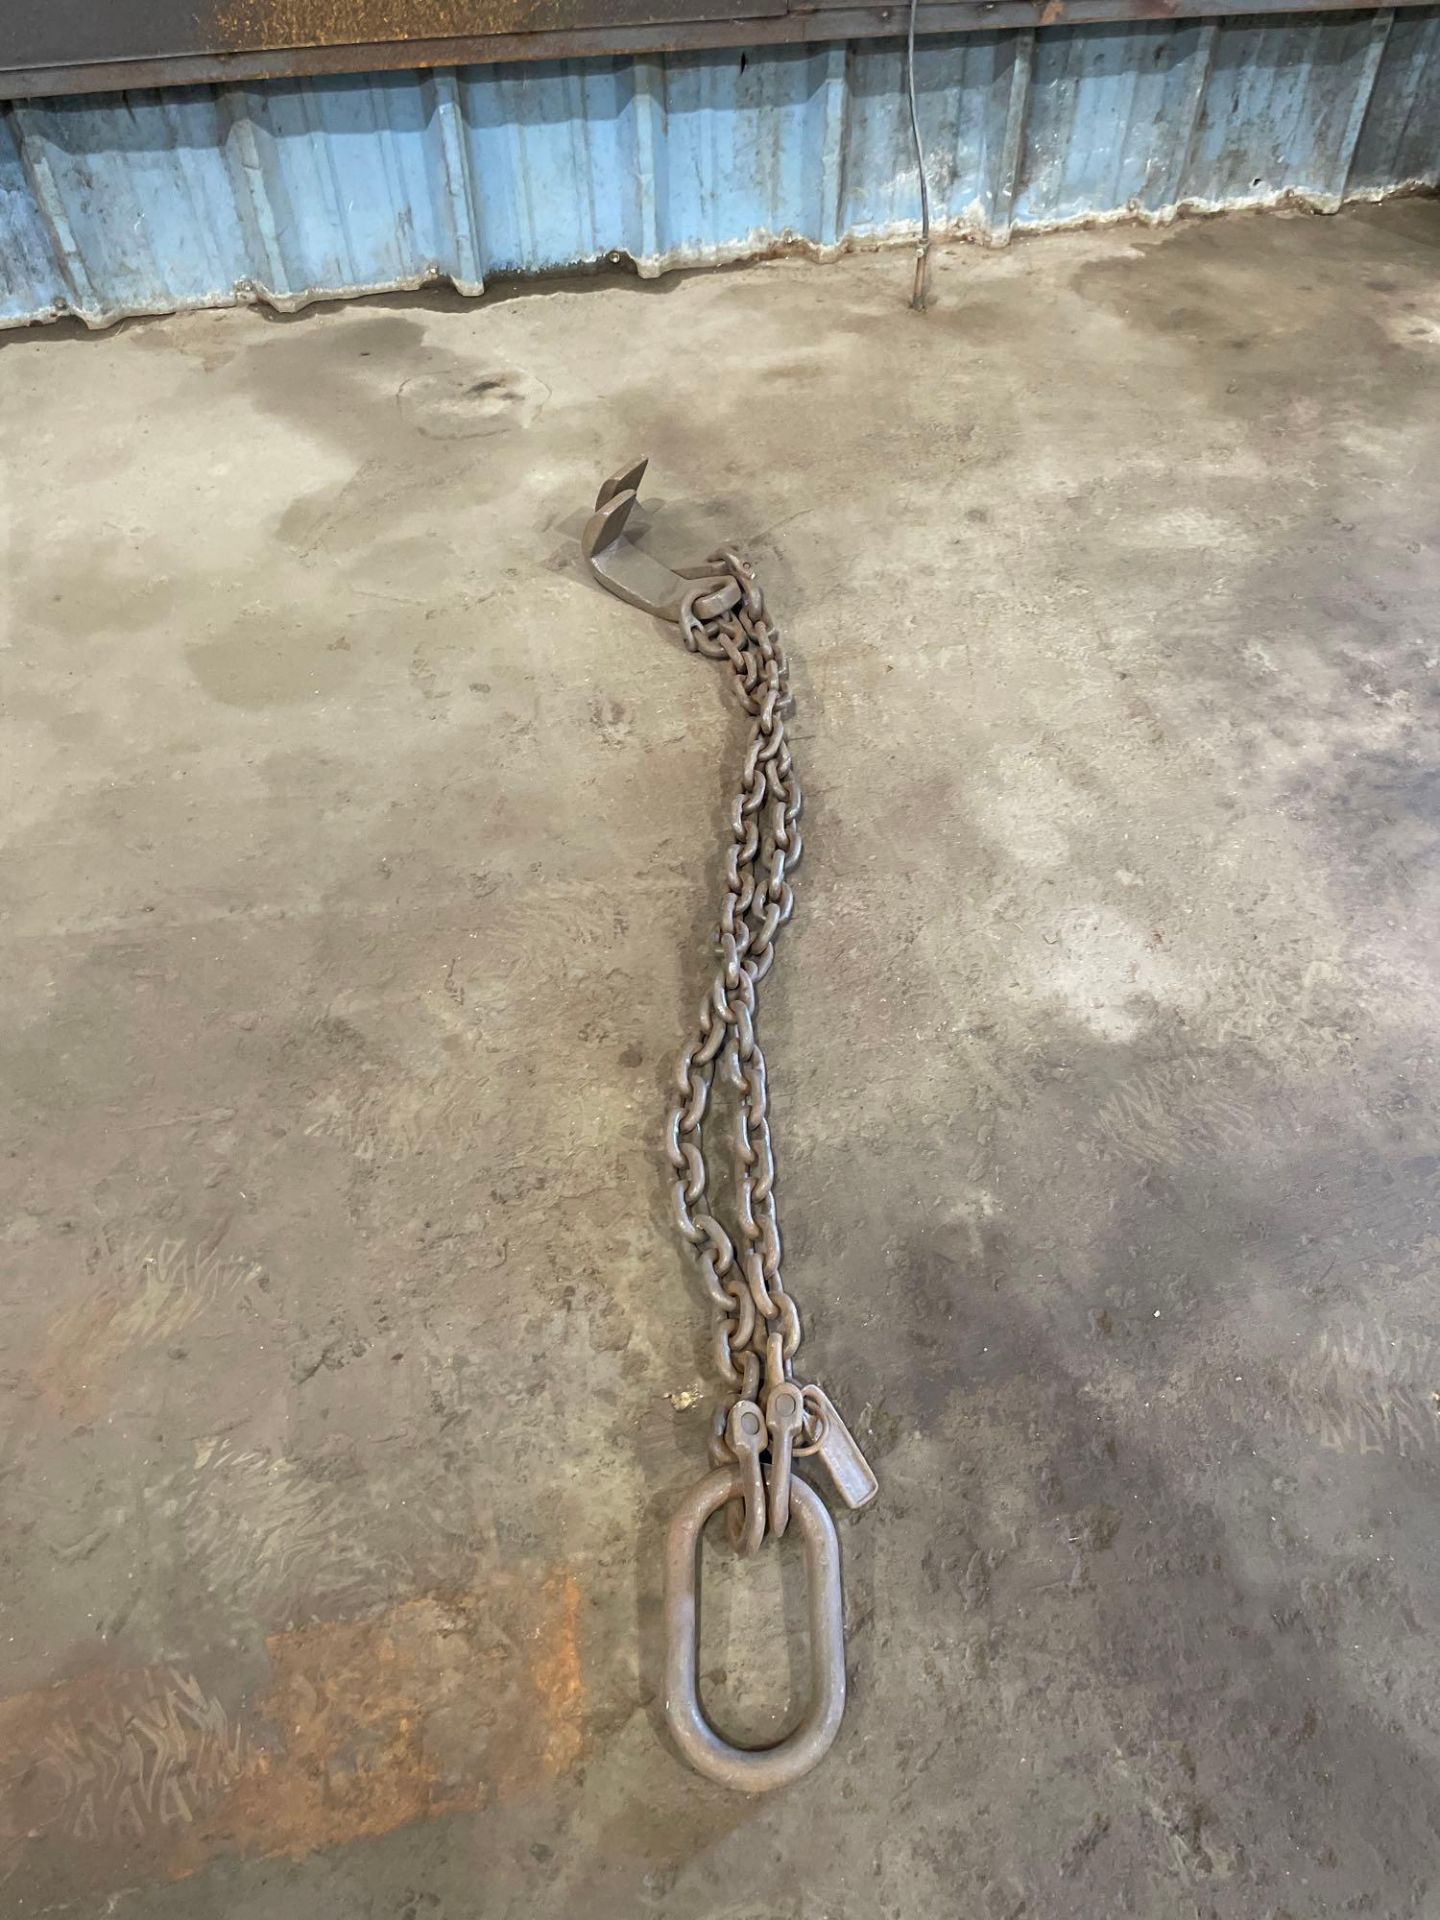 Lot of 2 Chains with Hooks: (1) 8' Long with 2 Hooks, (1) 41” Long with 2 Hooks - Image 2 of 6